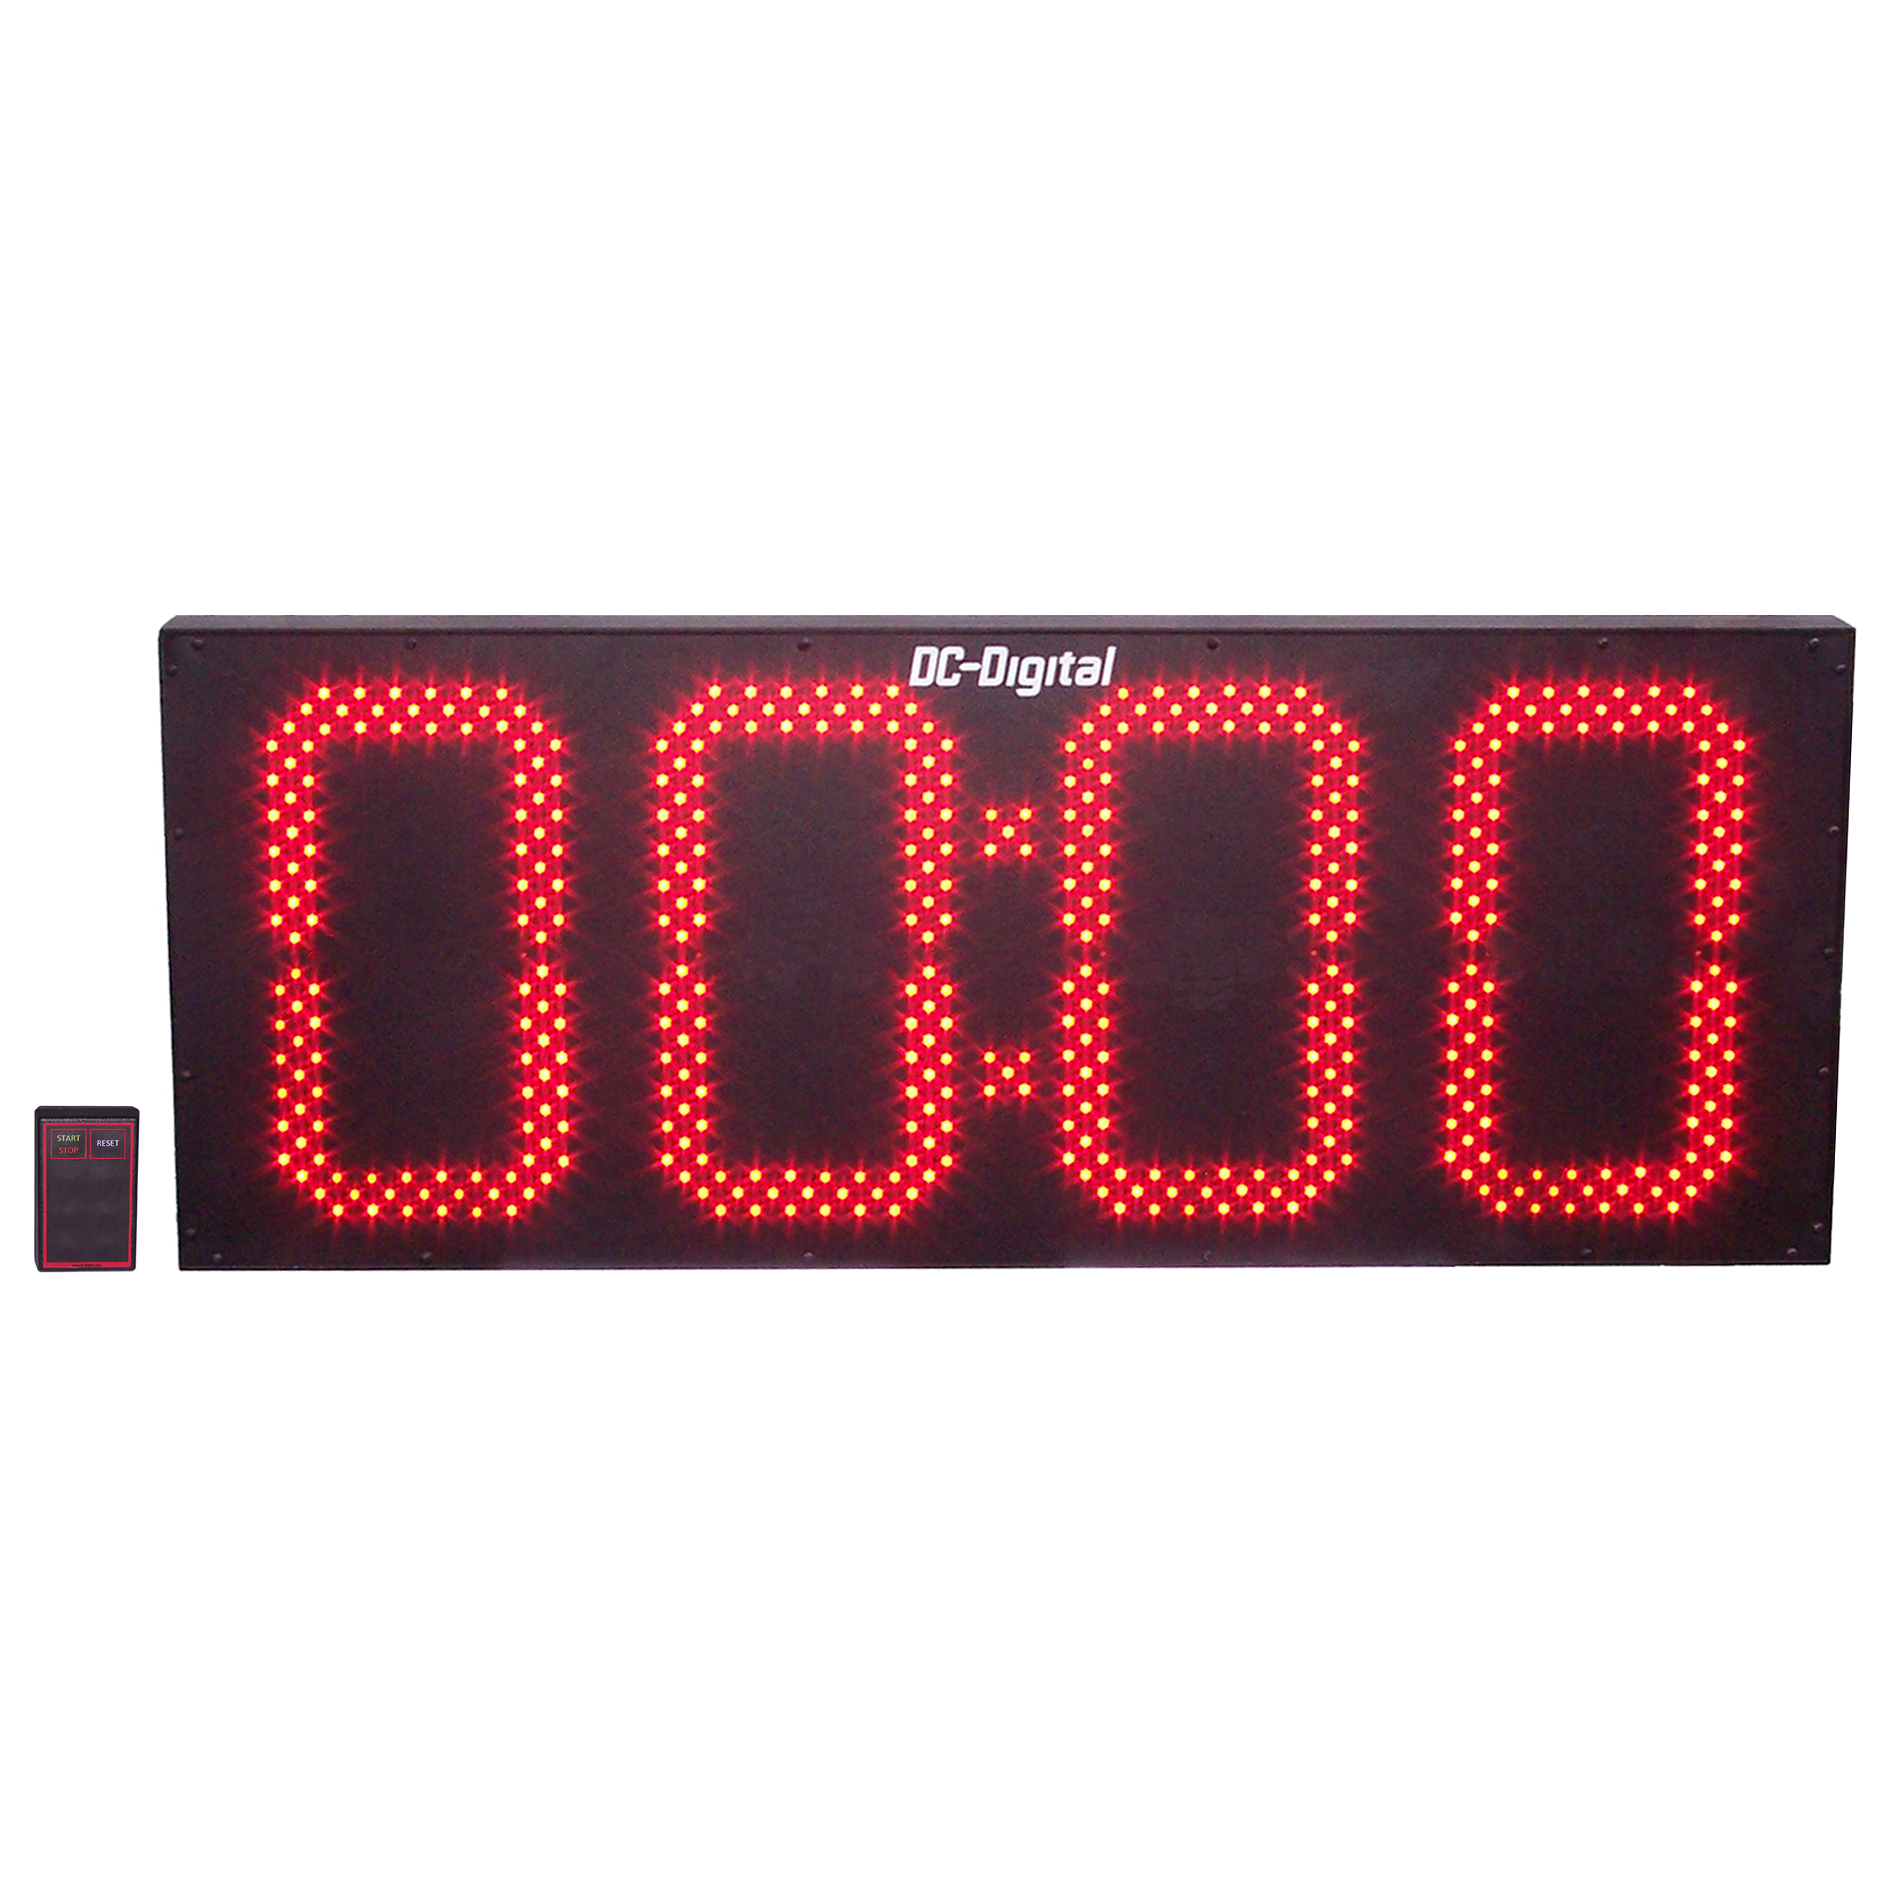 (DC-150T-UP-W-IN) 15.0 Inch LED Digital, RF-Wireless Controlled, Count Up Timer, Shift Digit Technology (INDOOR)